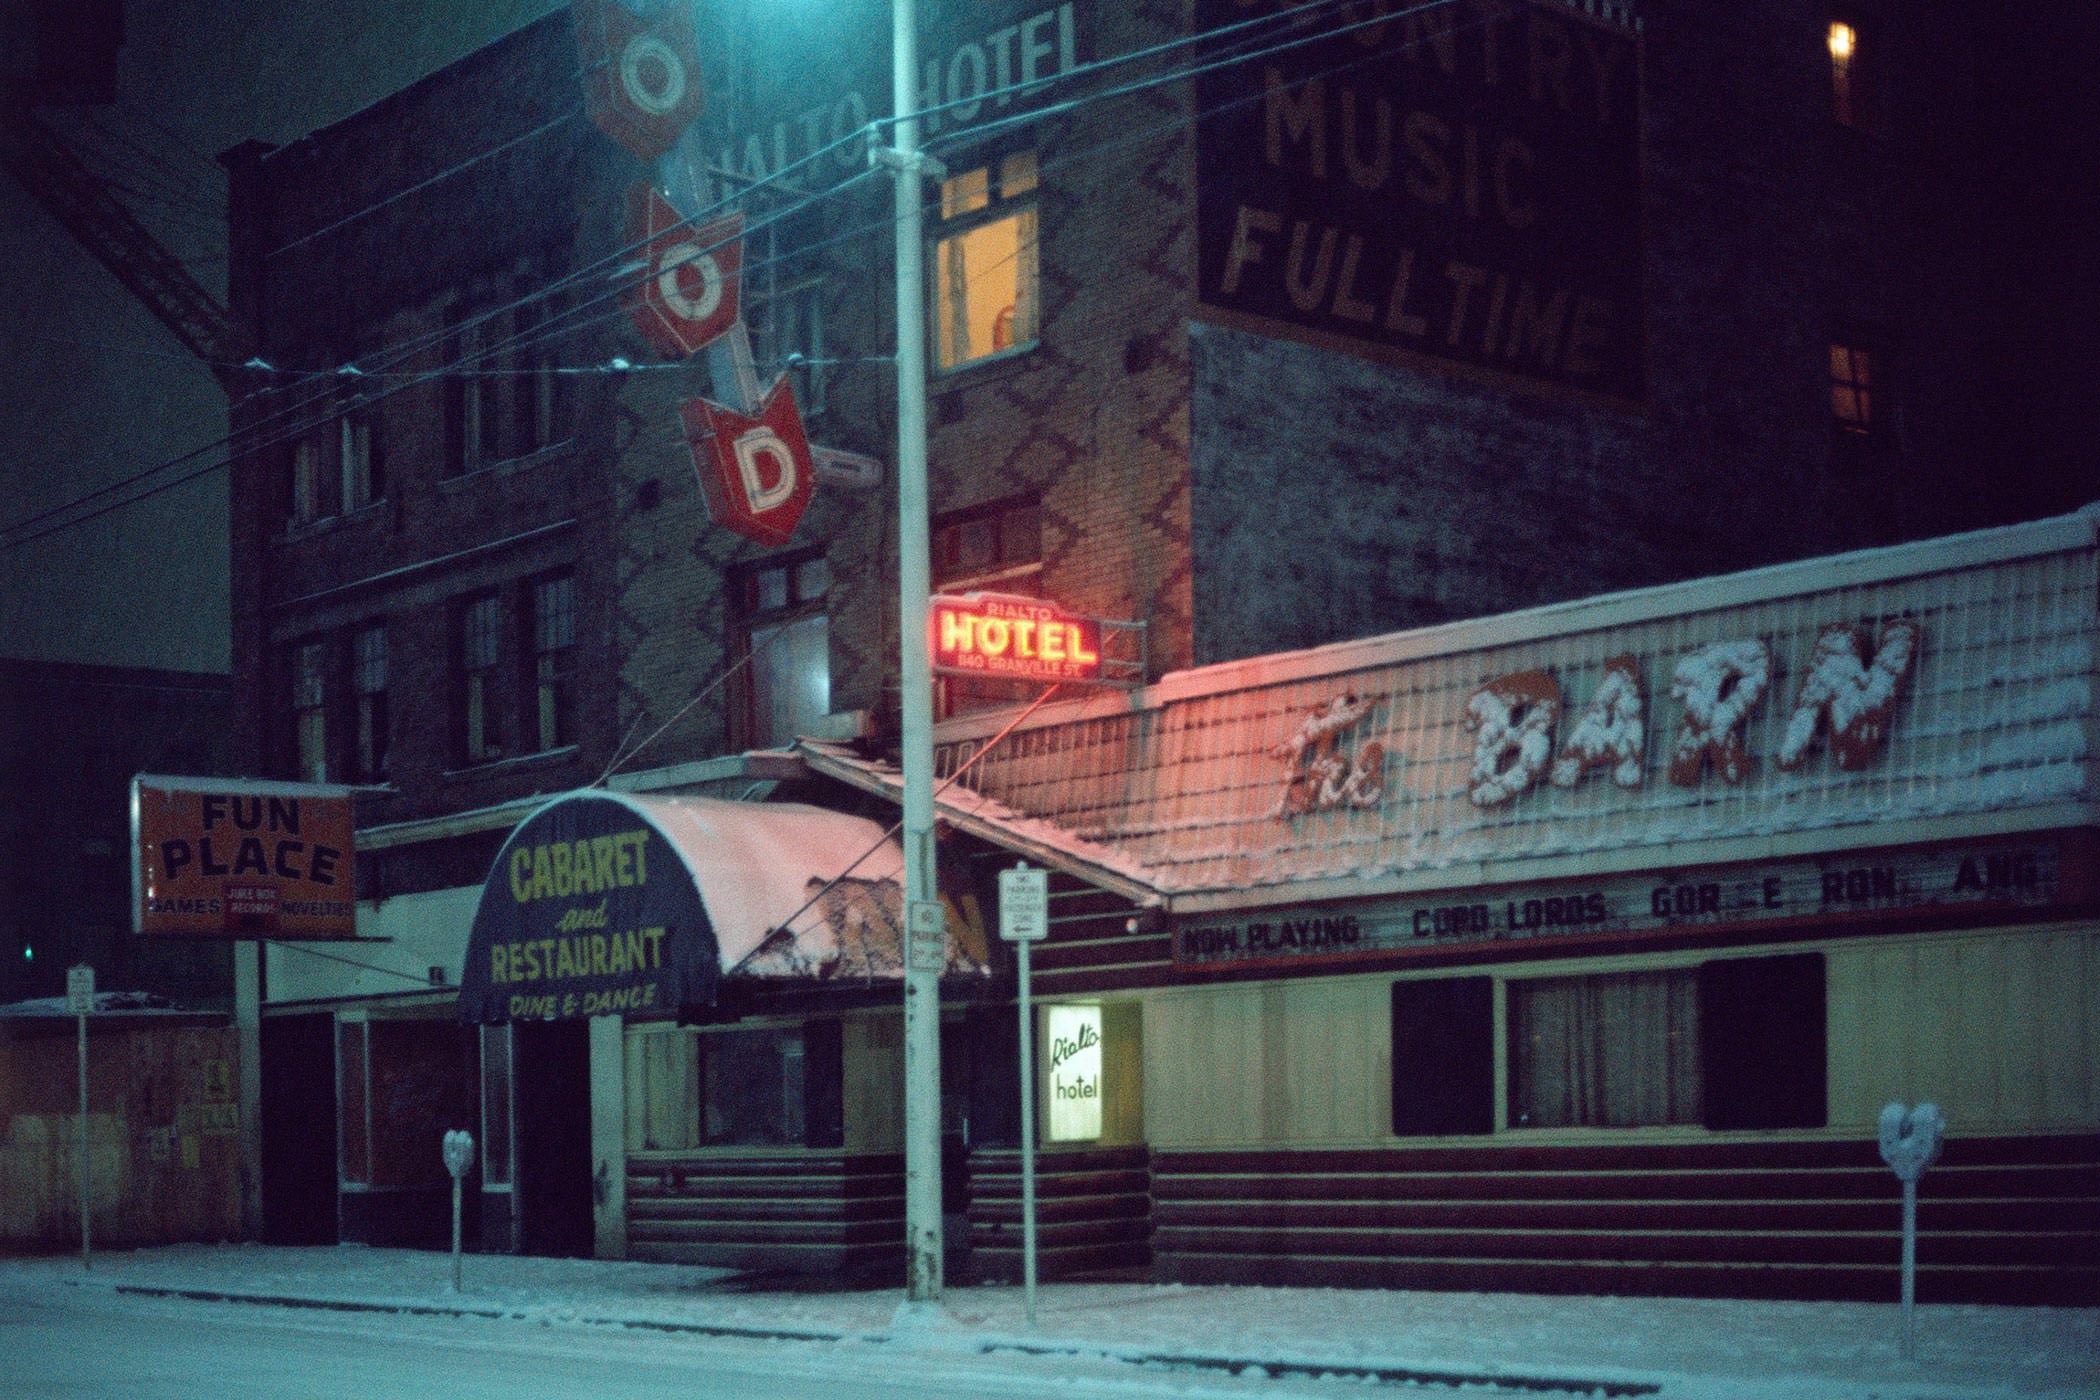 Greg Girard, Photographie, Under Vancouver, 1972-1982